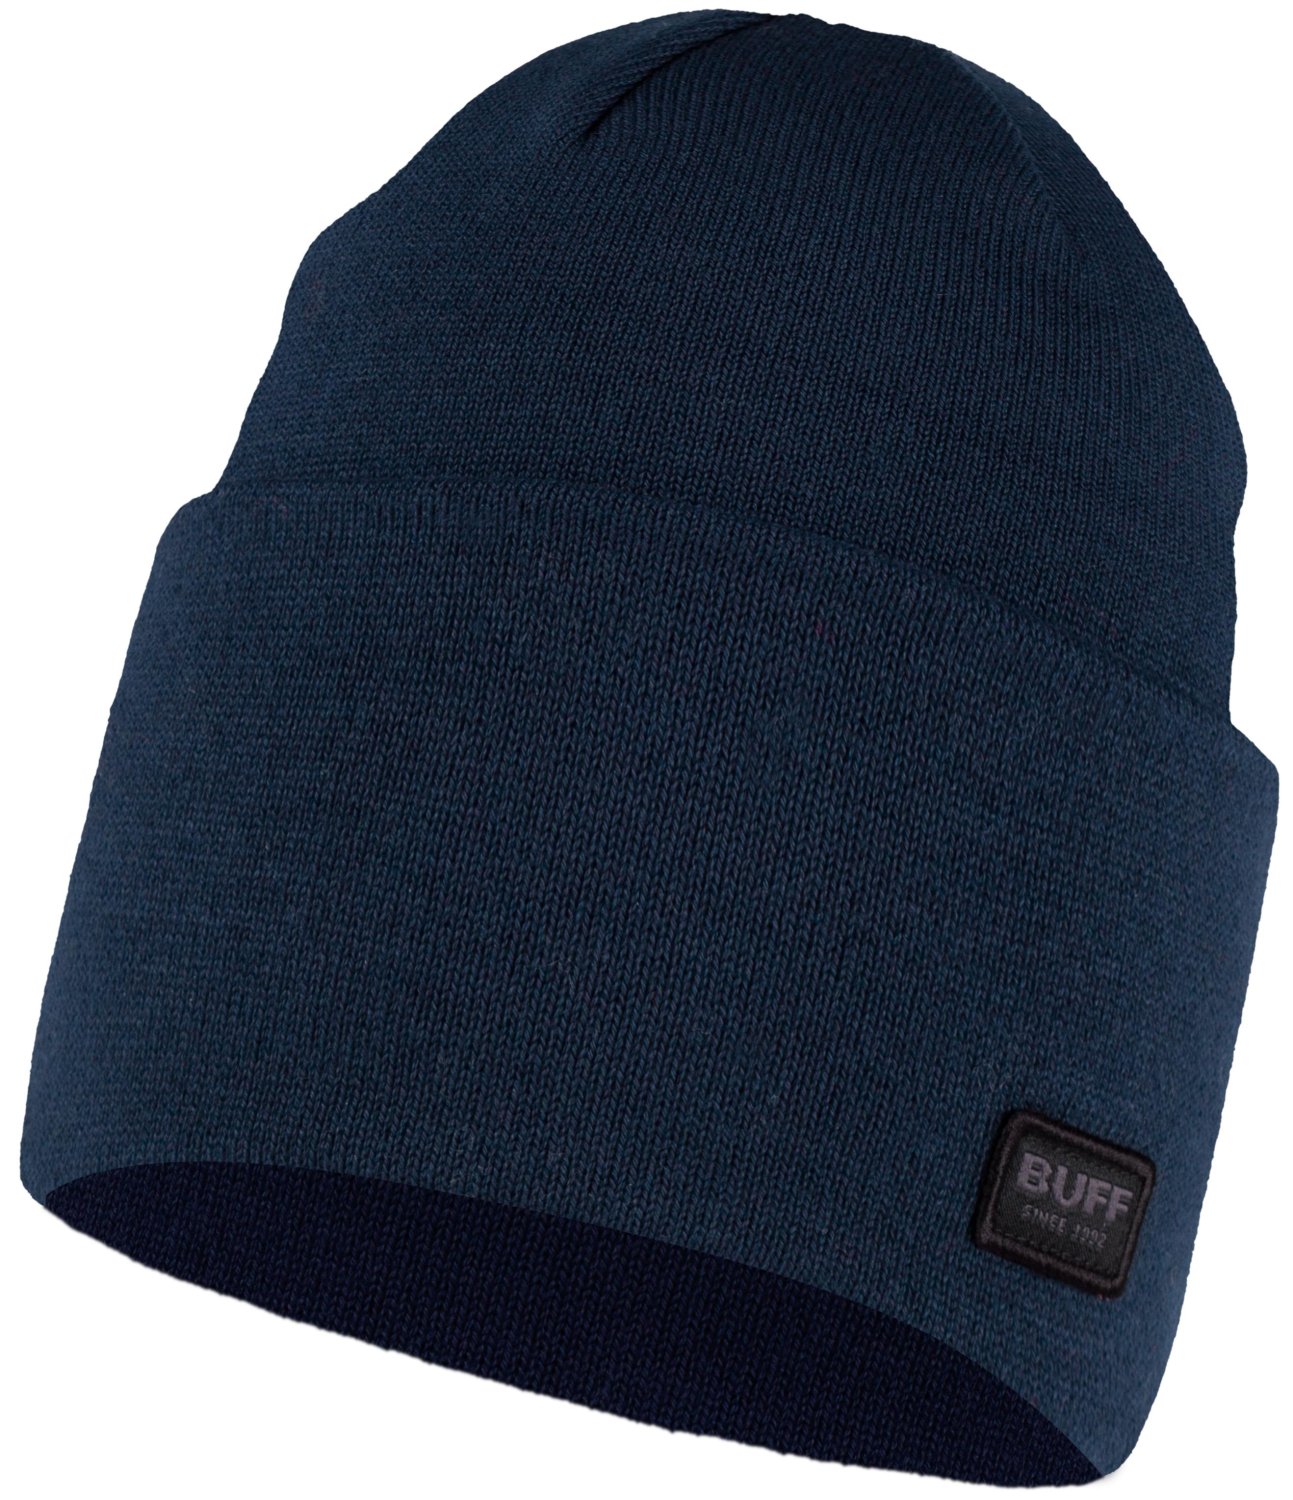 Шапка Buff Knitted Hat Niels Denim, US:one size, 126457.788.10.00 шапка buff knitted hat niels cru us one size 126457 014 10 00